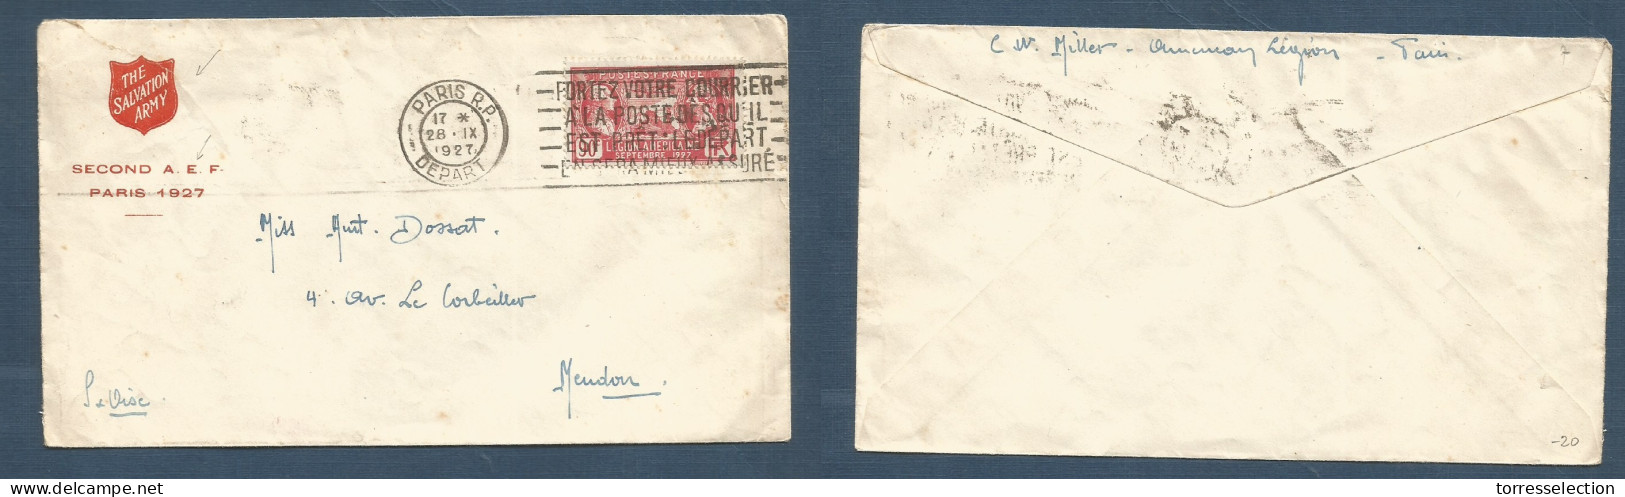 MILITARY MAIL. 1927 (28 Sept) USA, American Forces- Second AEF. Salvation Army Fkd Envelope. America Legion. Local Fkd U - Poste Militaire (PM)